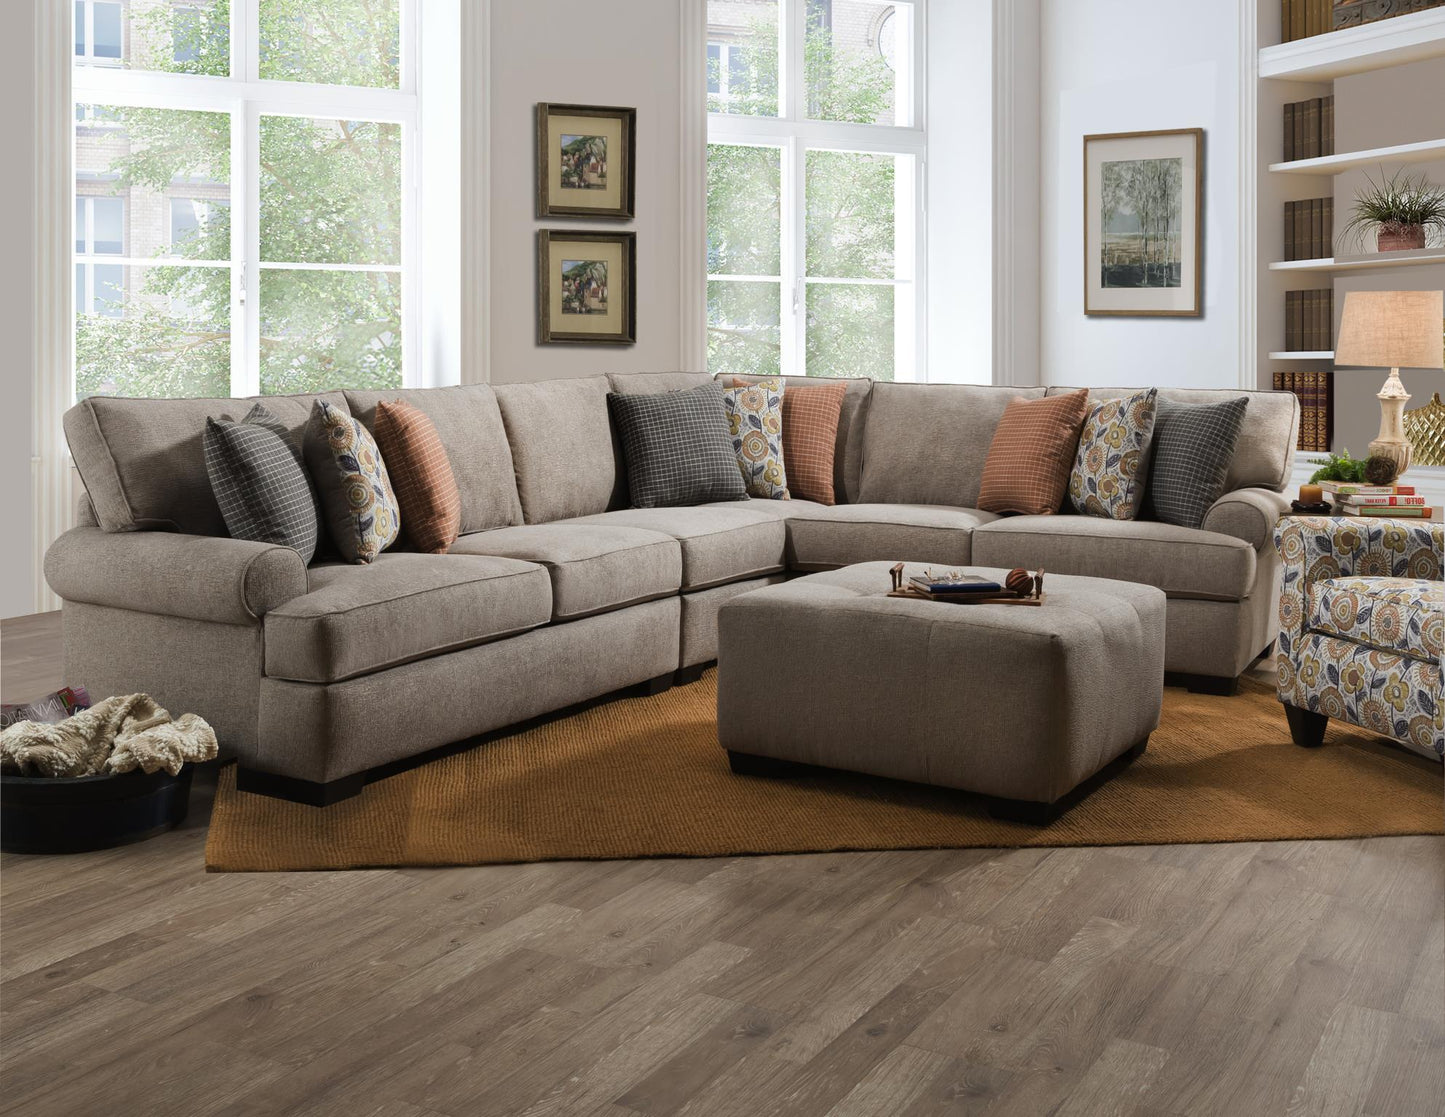 WEEKLY or MONTHLY. Marlon Dove Sectional